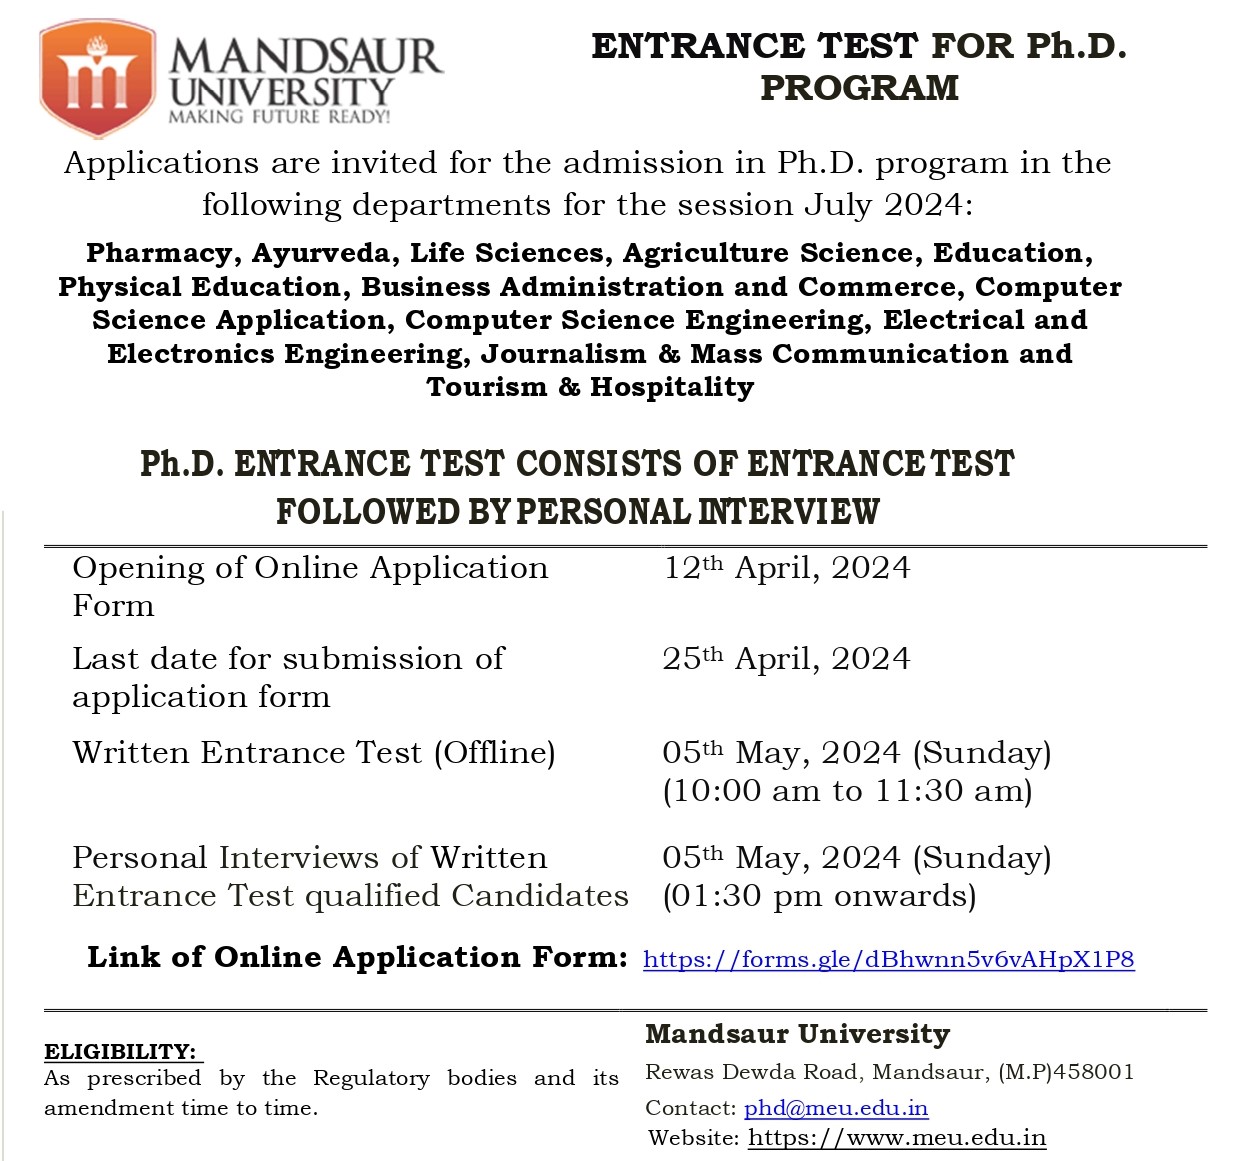 Apply for Ph.D. Entrance Exam July 2024